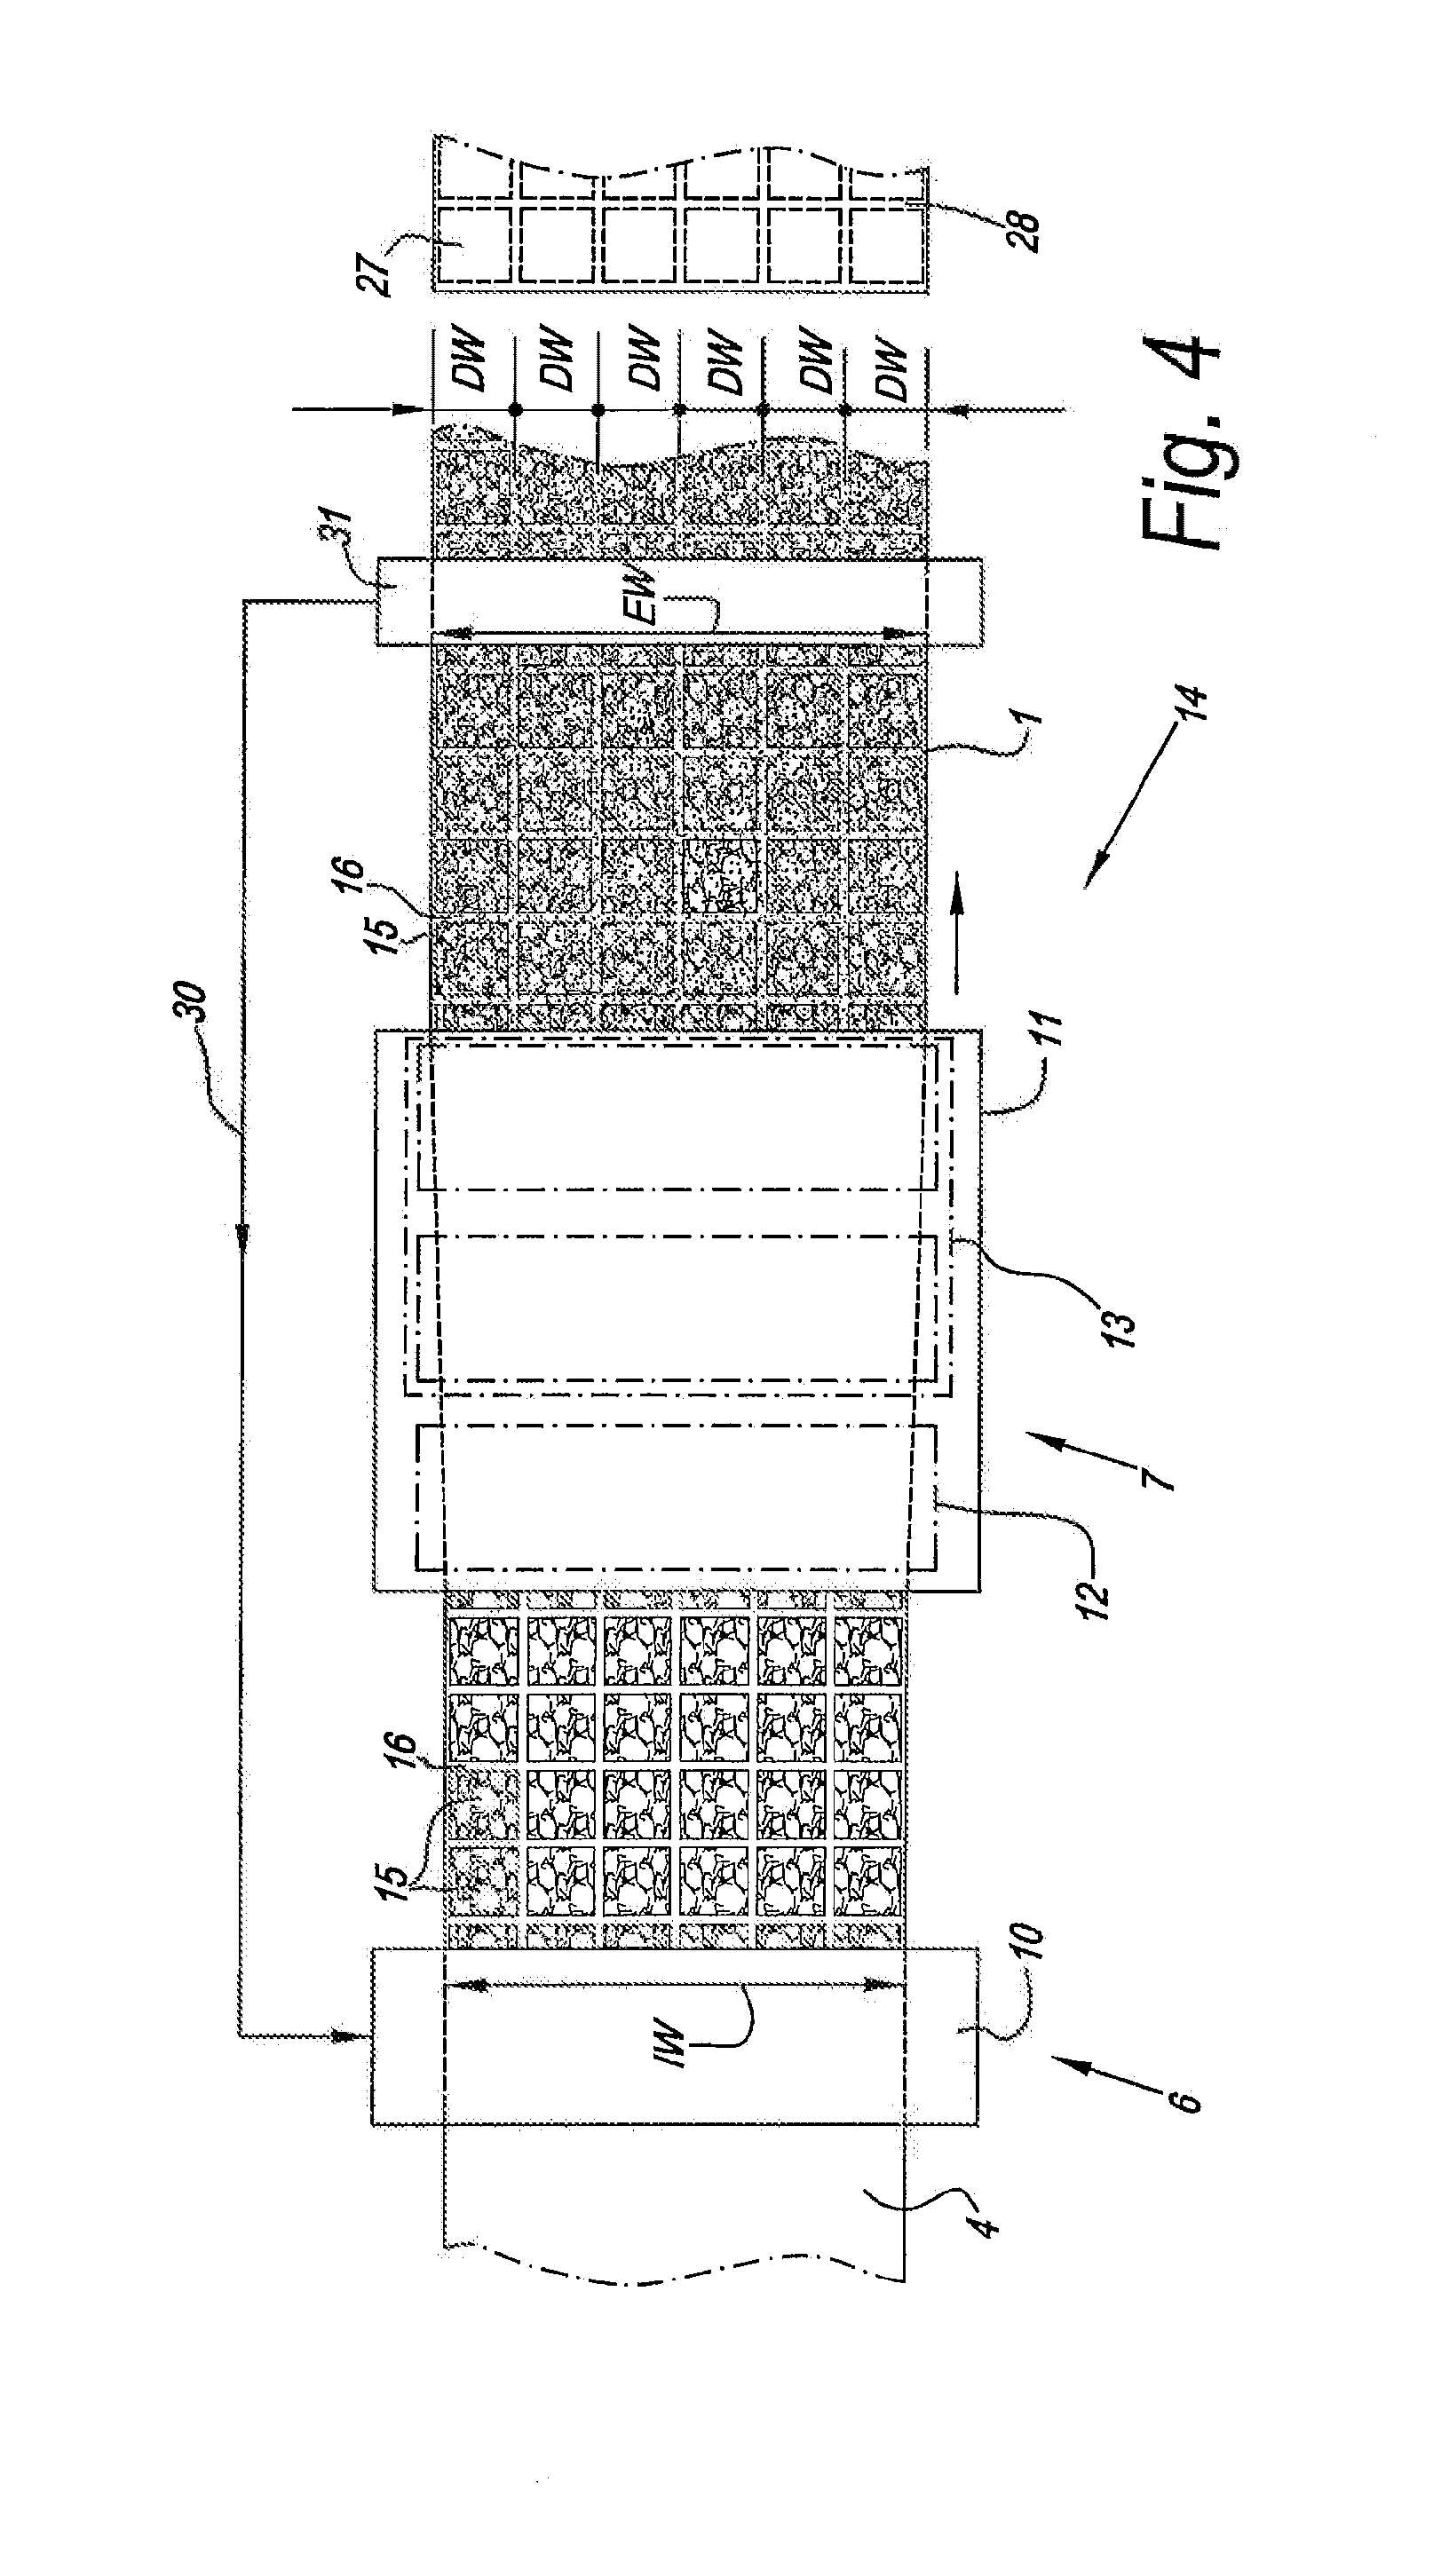 Method for Manufacturing a Laminate Product, Laminate Products Obtained Thereby and Device for Realizing the Method